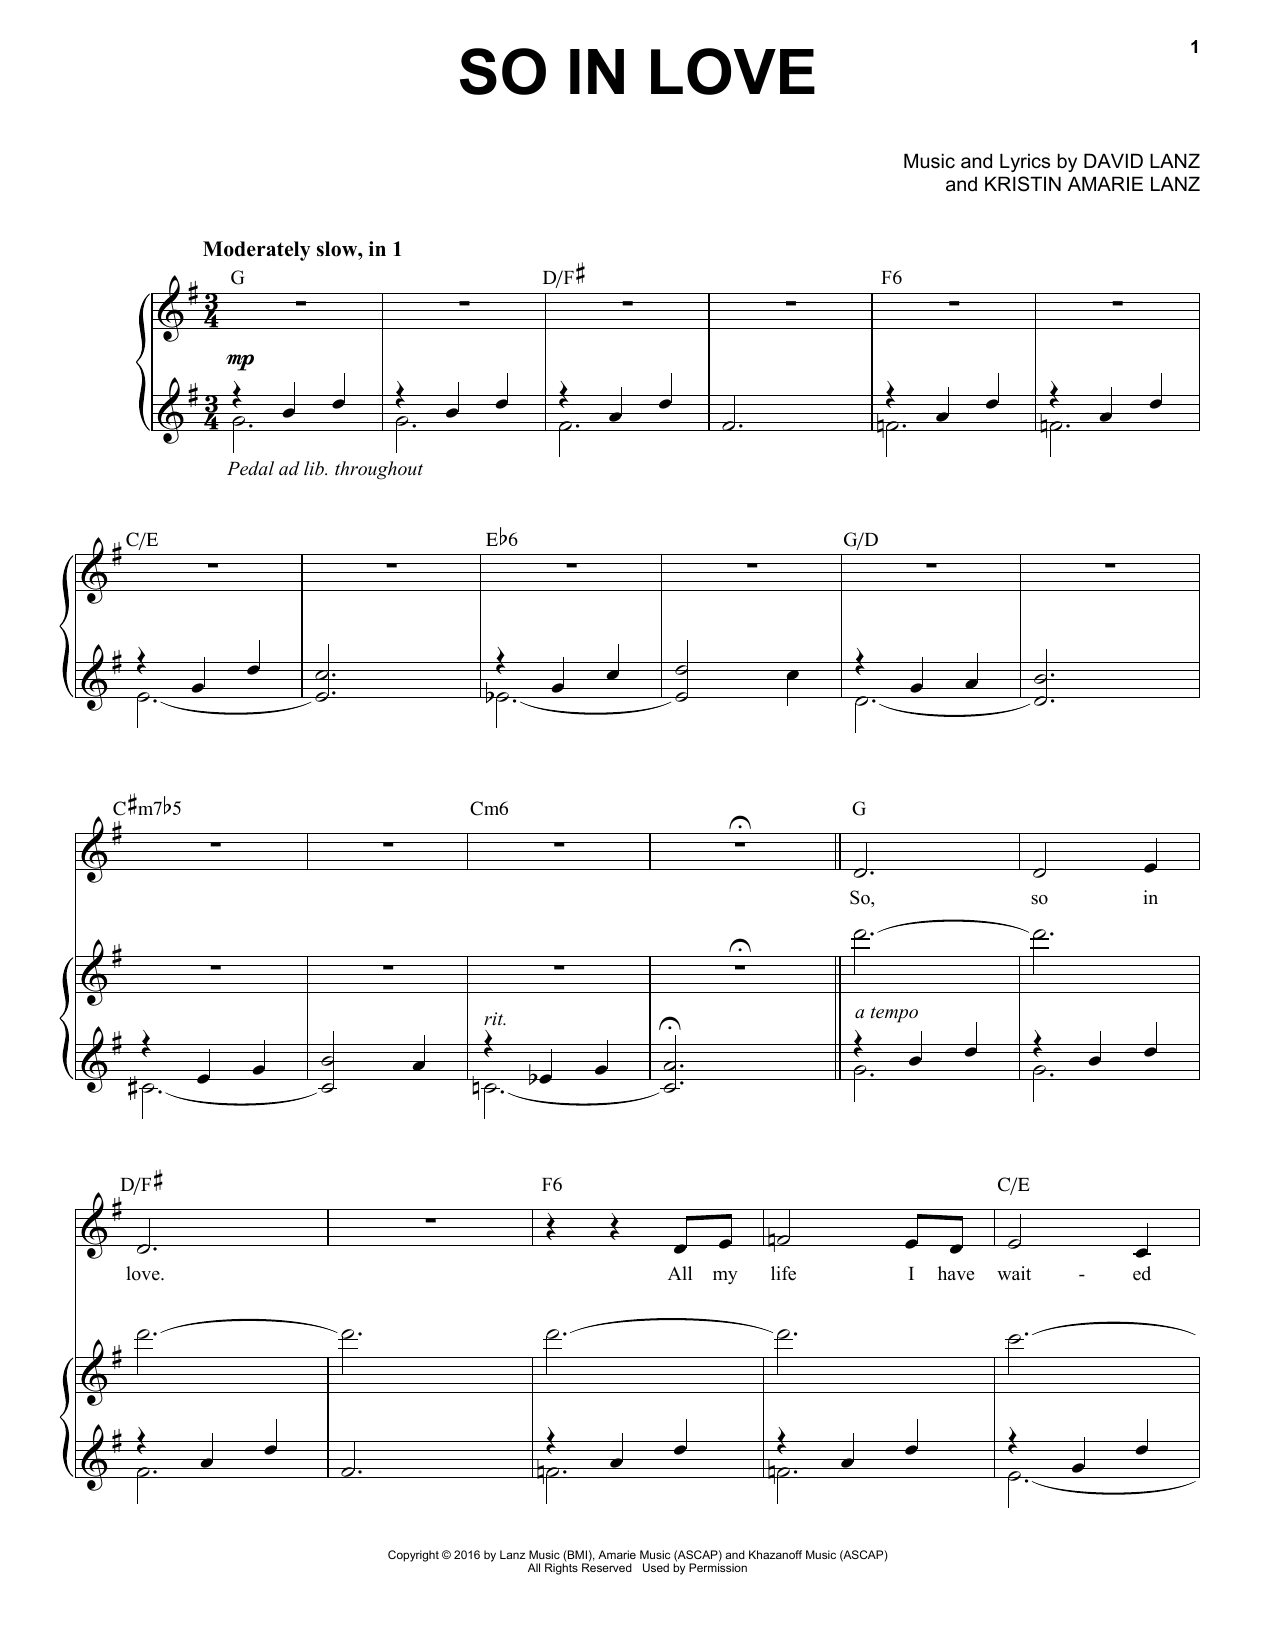 David Lanz & Kristin Amarie So in Love sheet music notes and chords. Download Printable PDF.